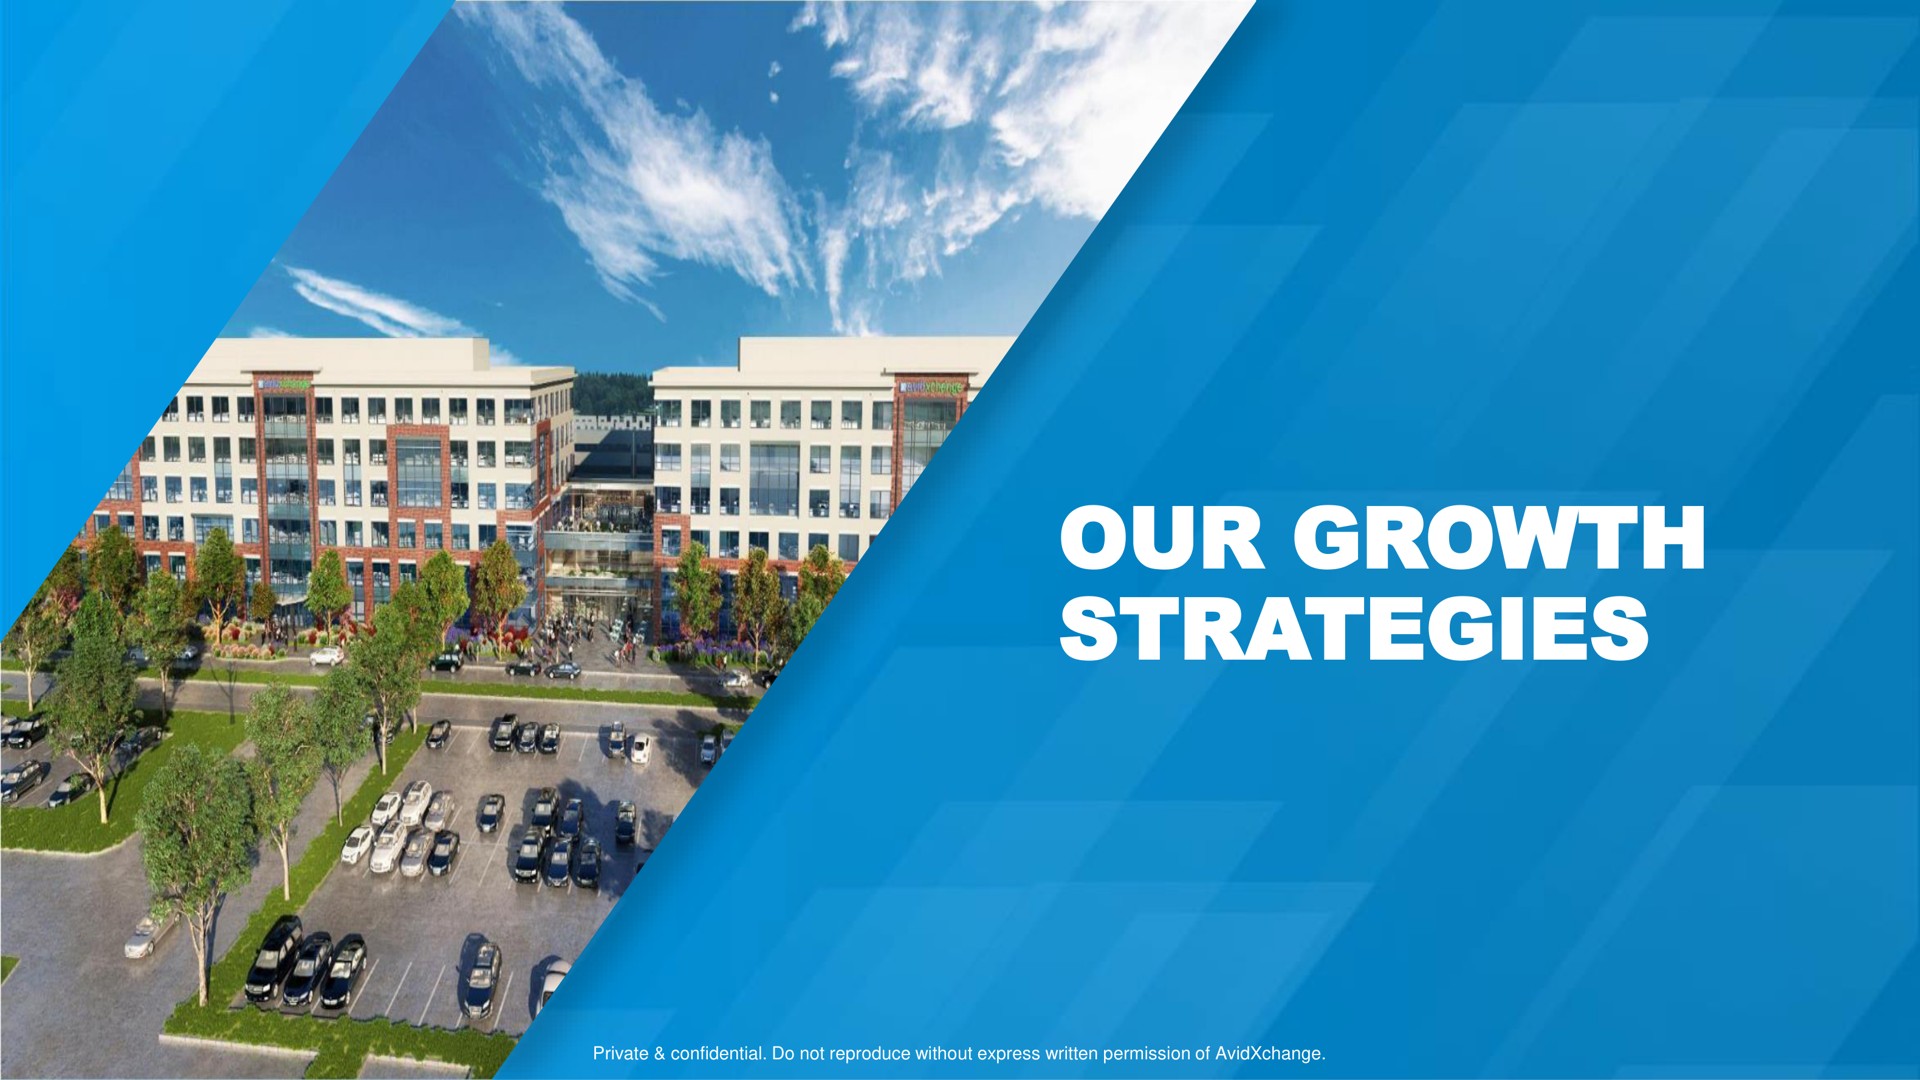 our growth strategies | AvidXchange